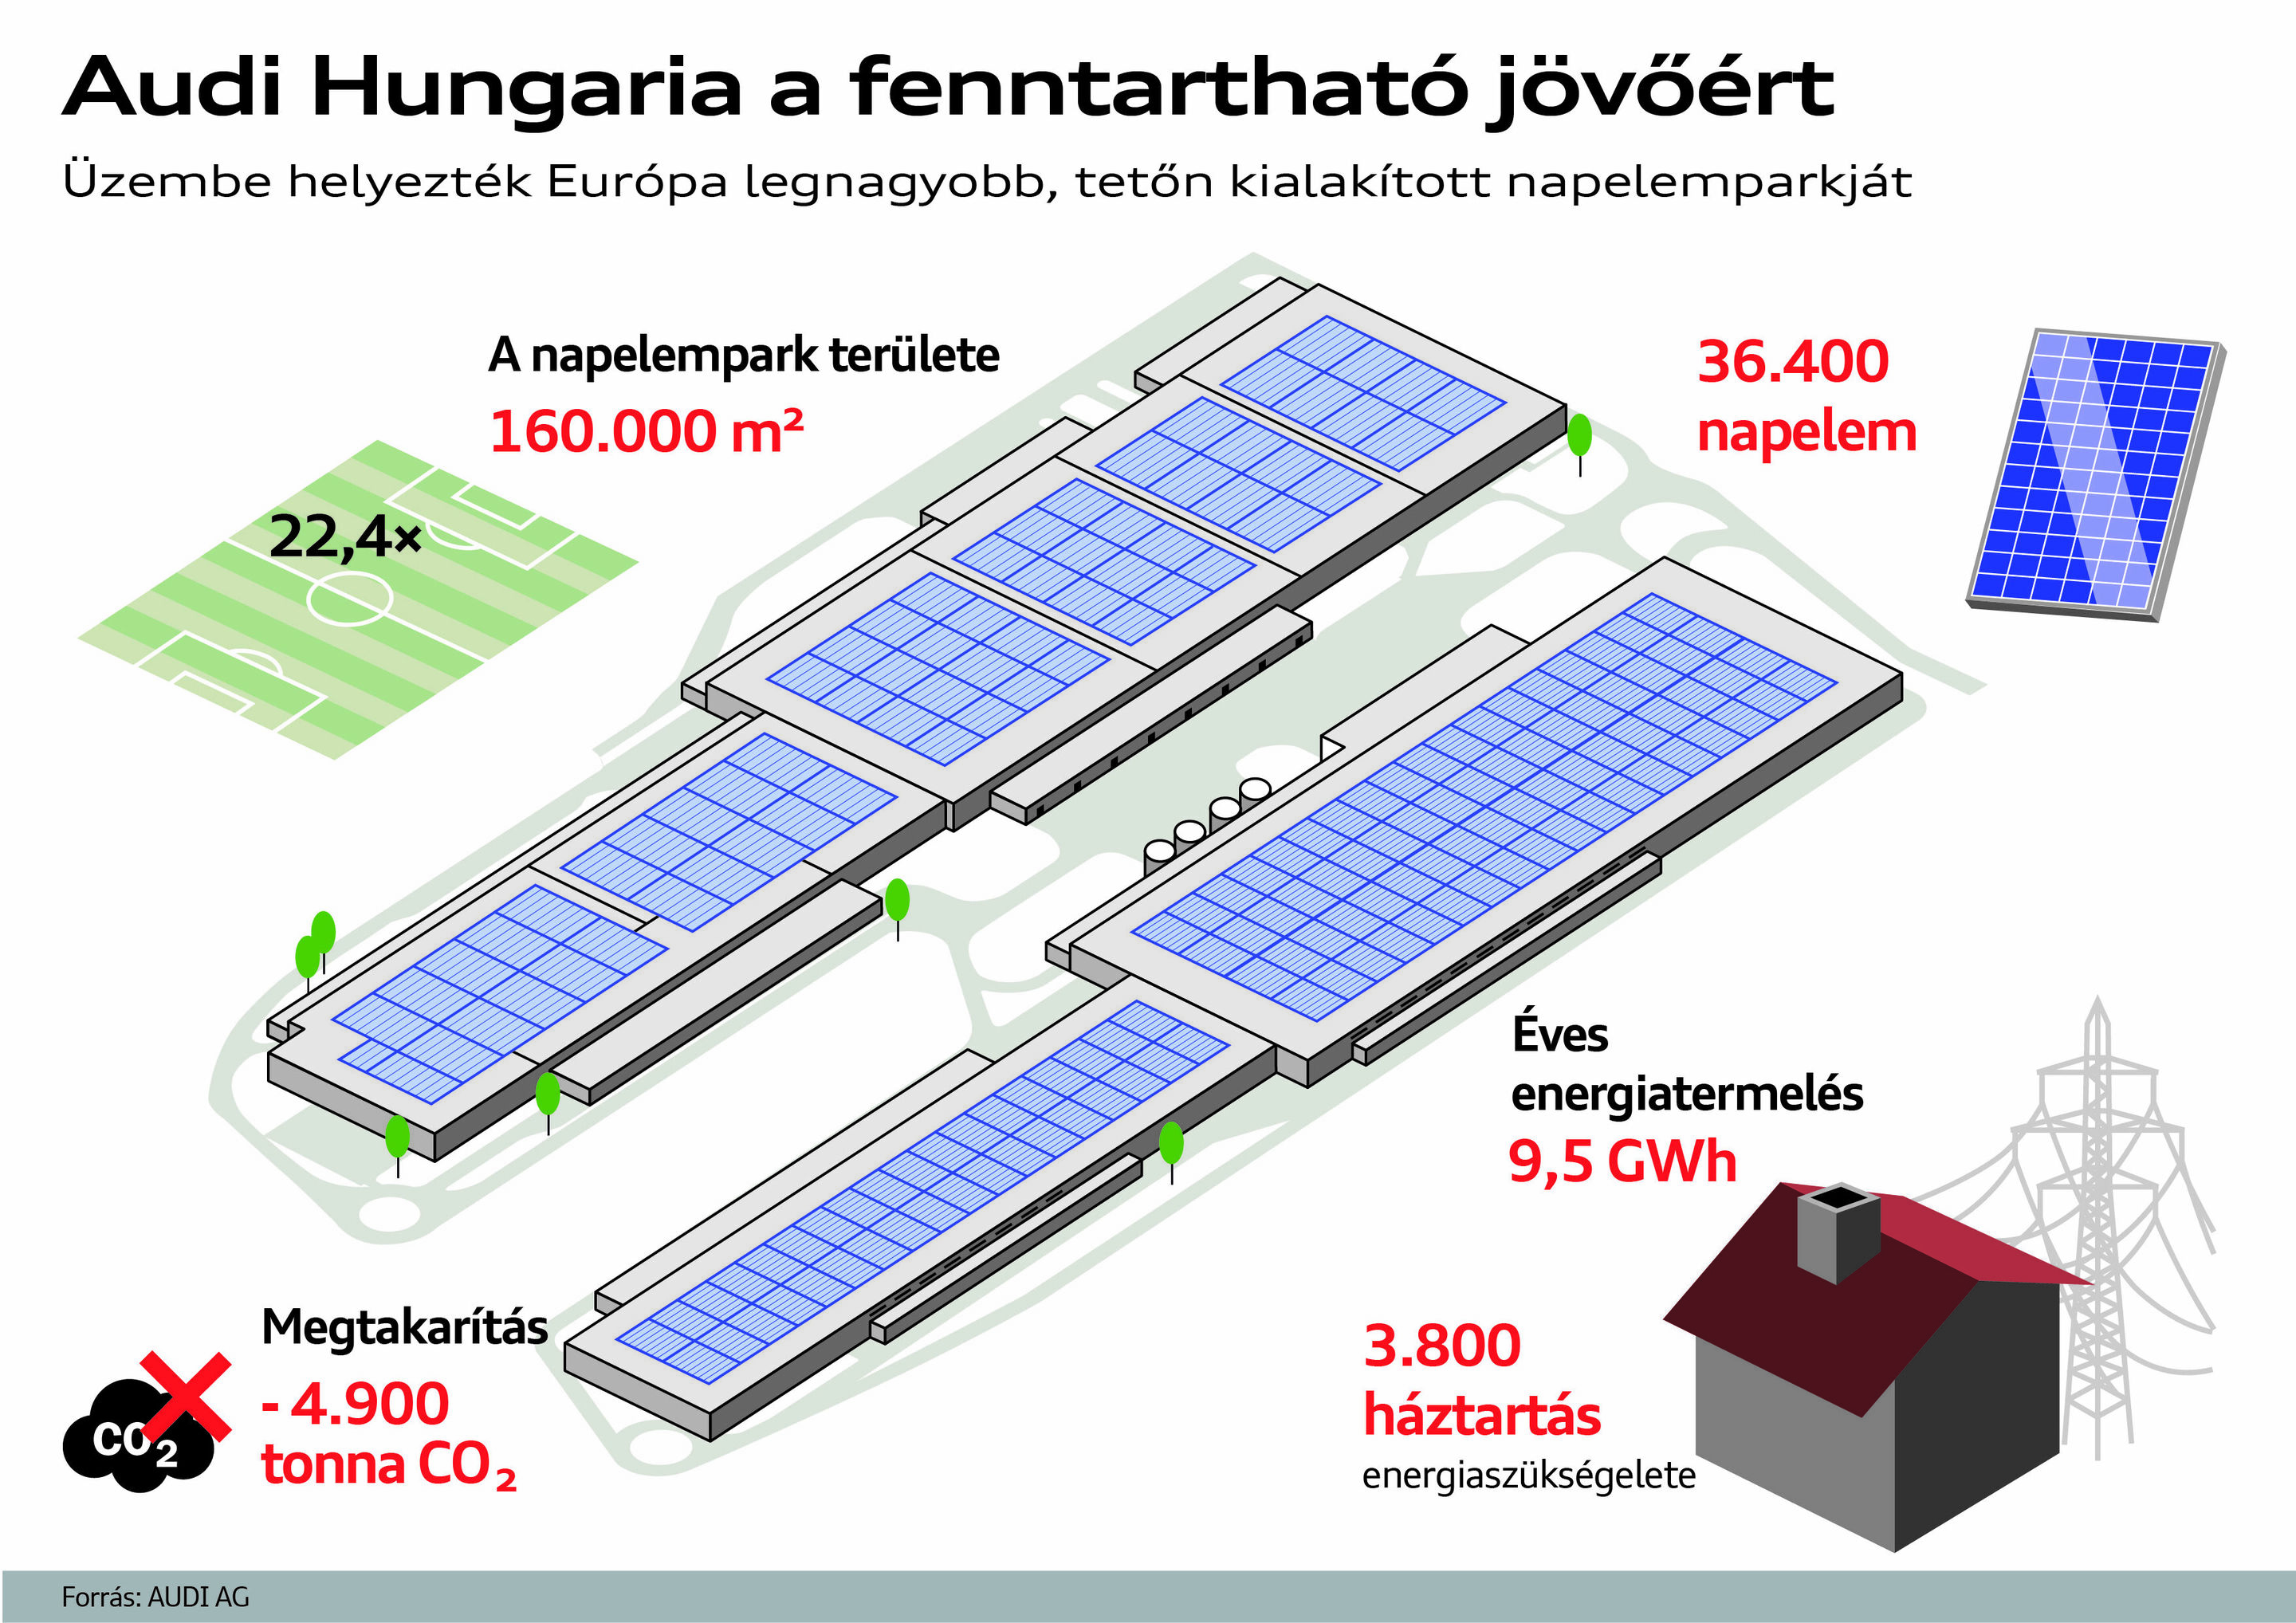 Audi Hungaria is the second carbon-neutral Audi site